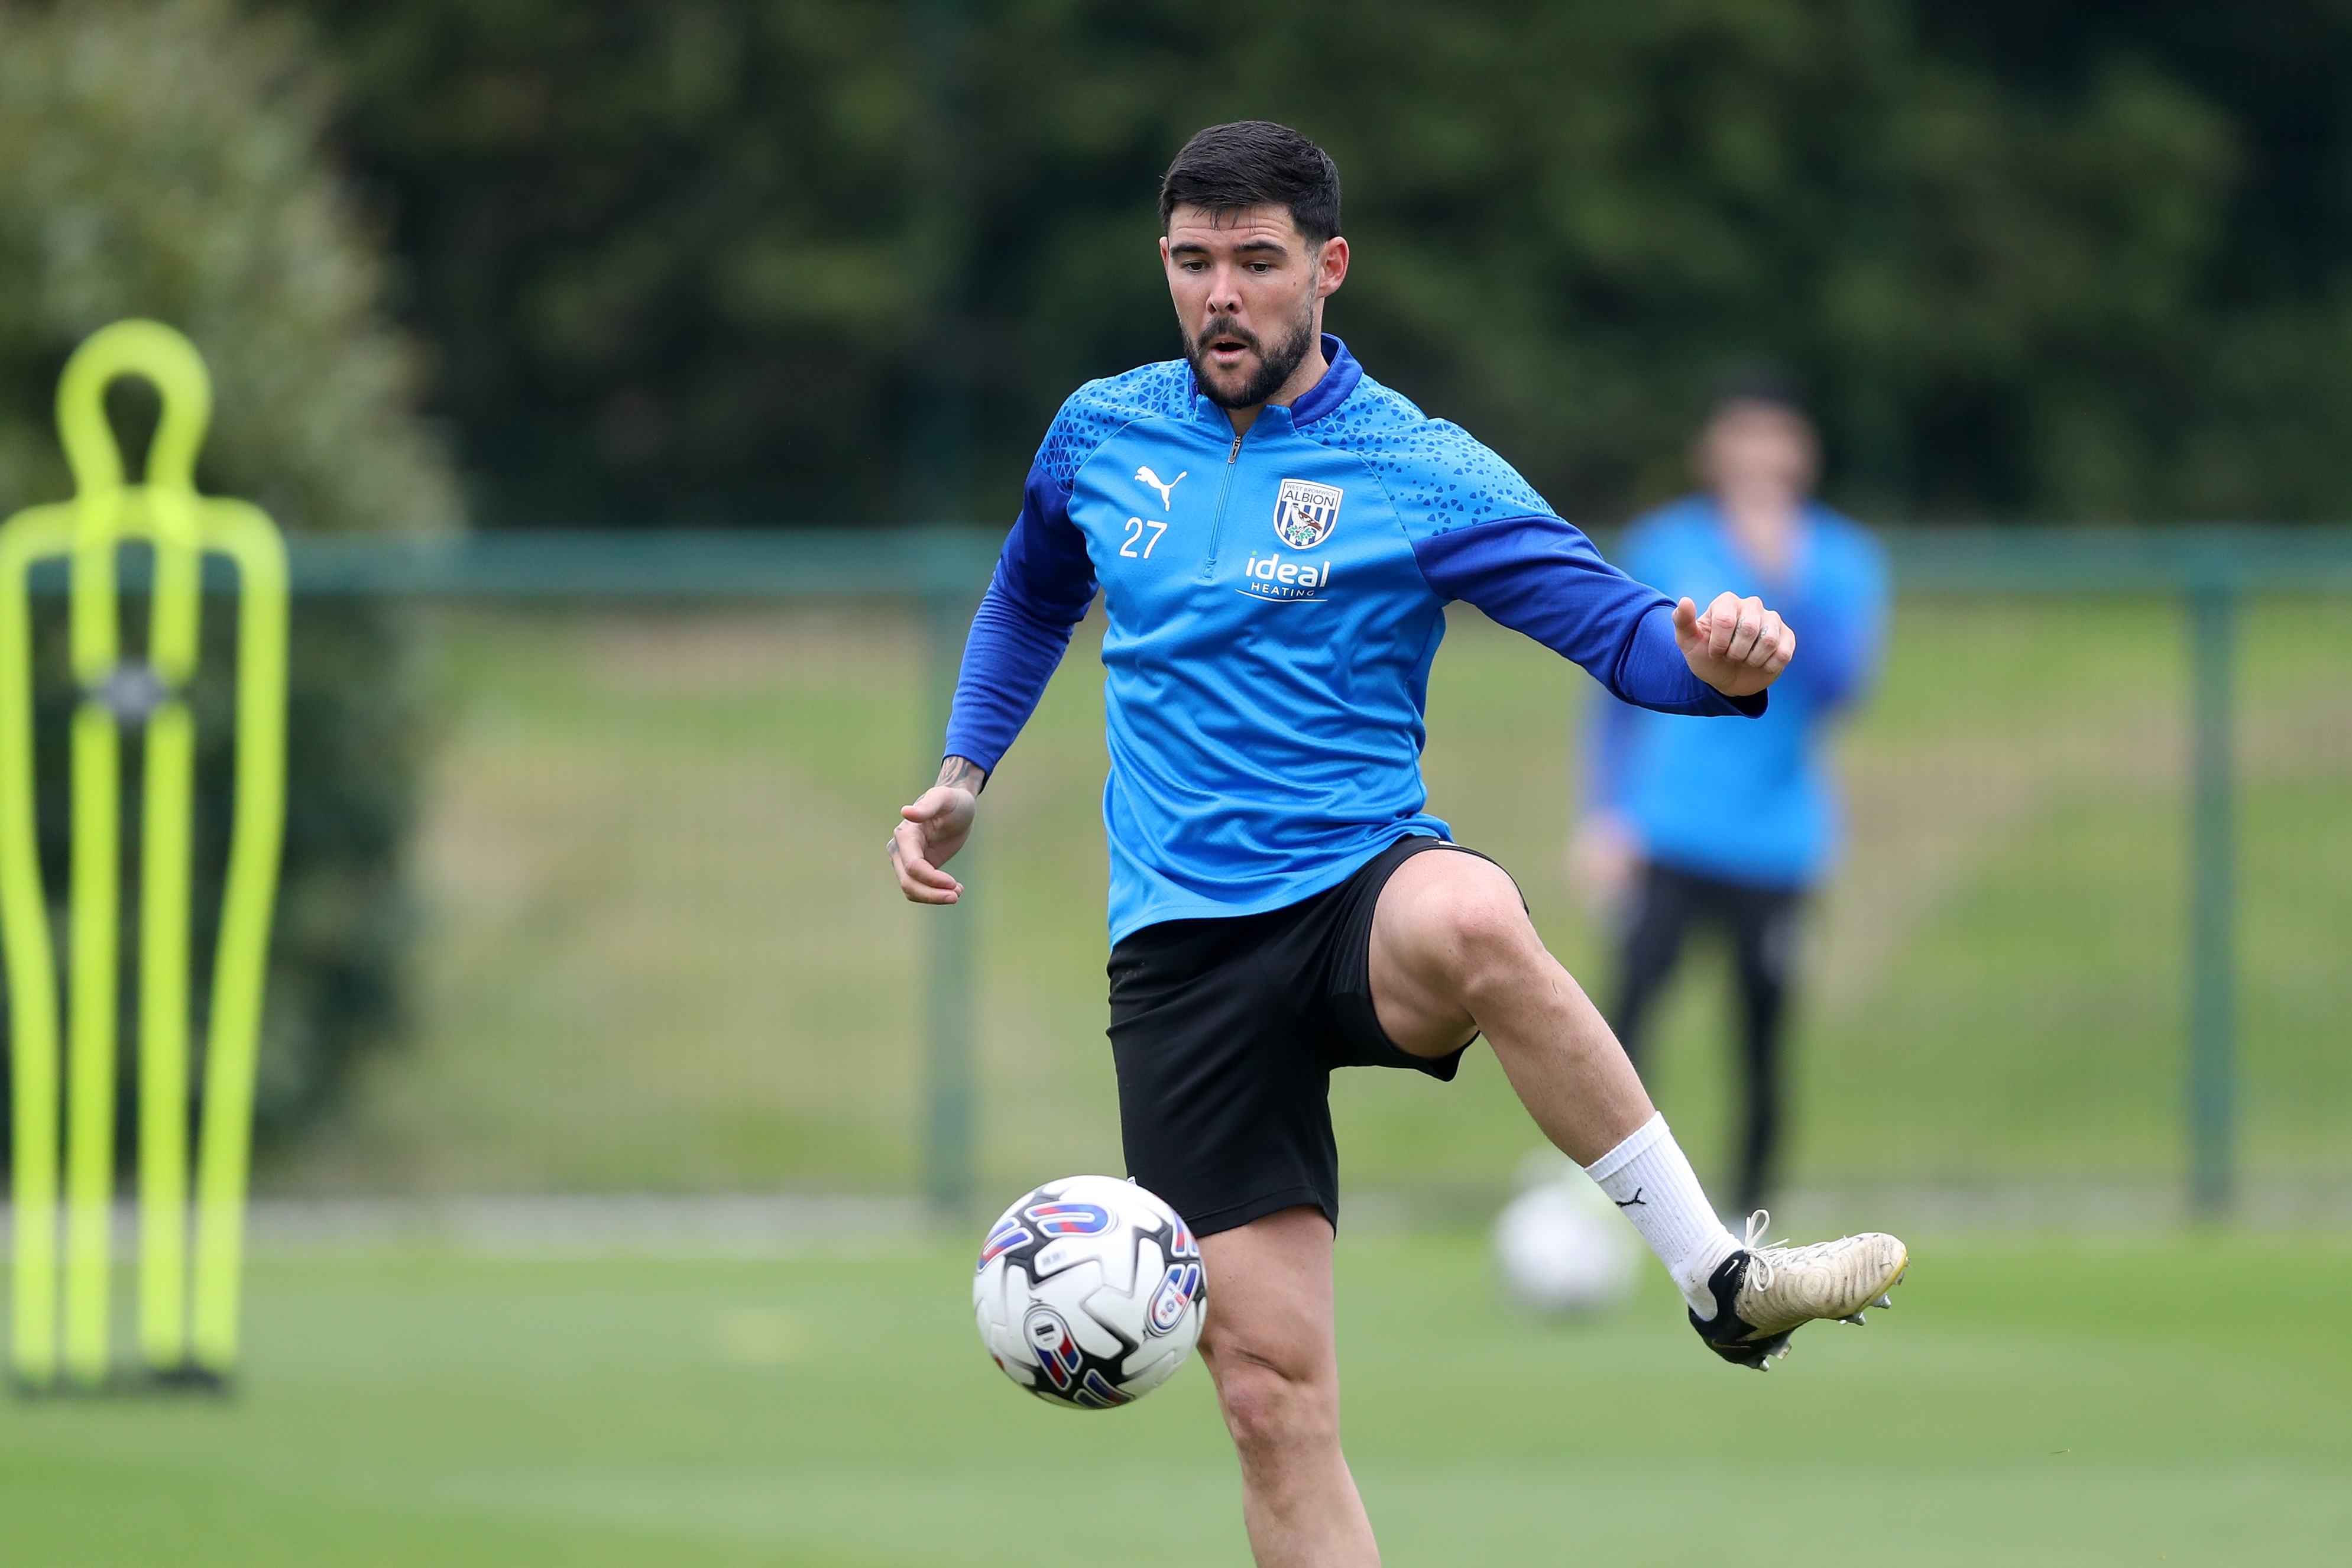 Alex Mowatt passing the ball during a training session